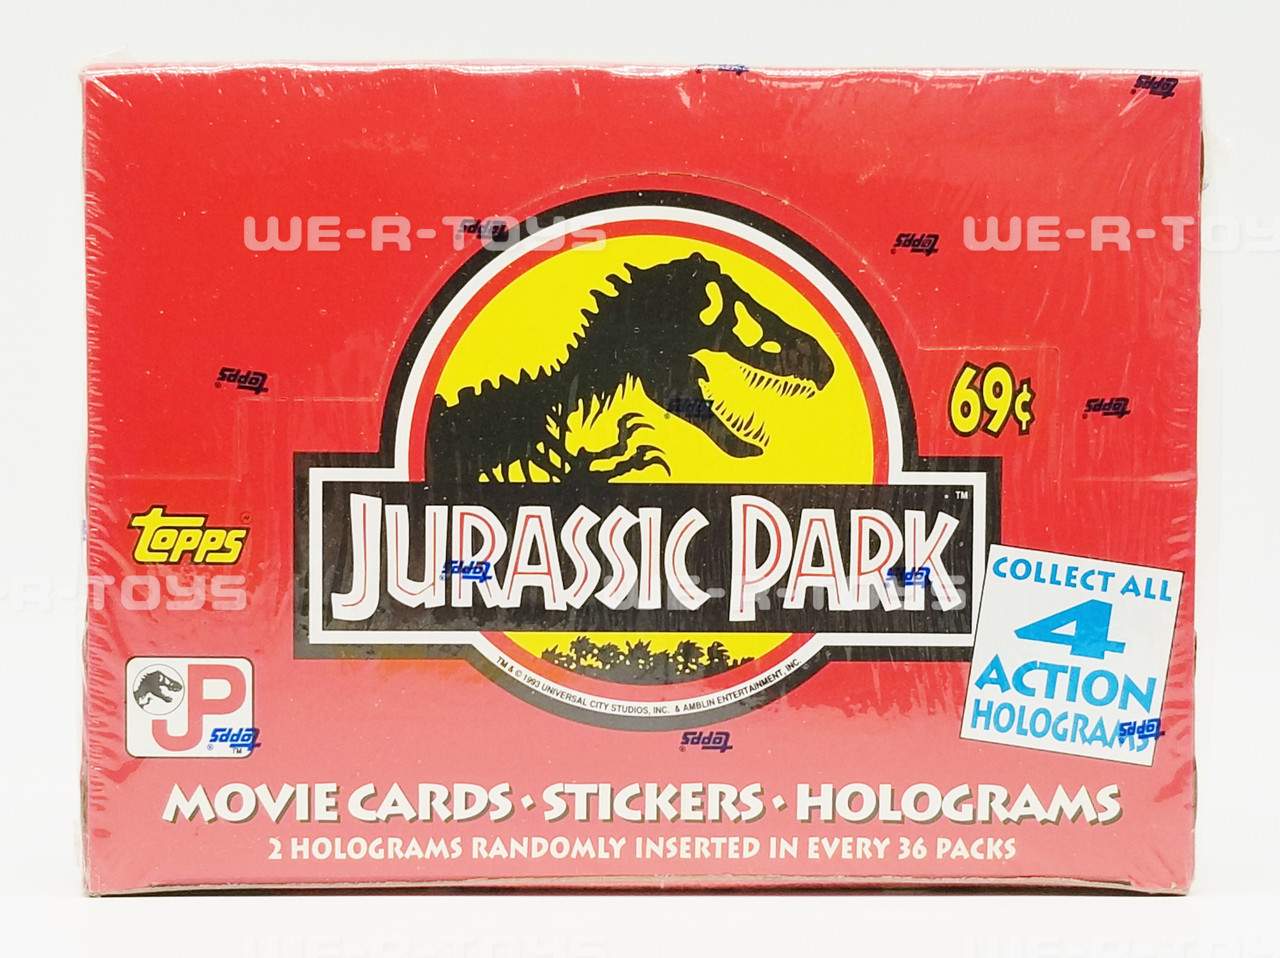 Jurassic Park Topps Movie Cards Stickers Holograms 36 Packs Factory Sealed  Box - We-R-Toys